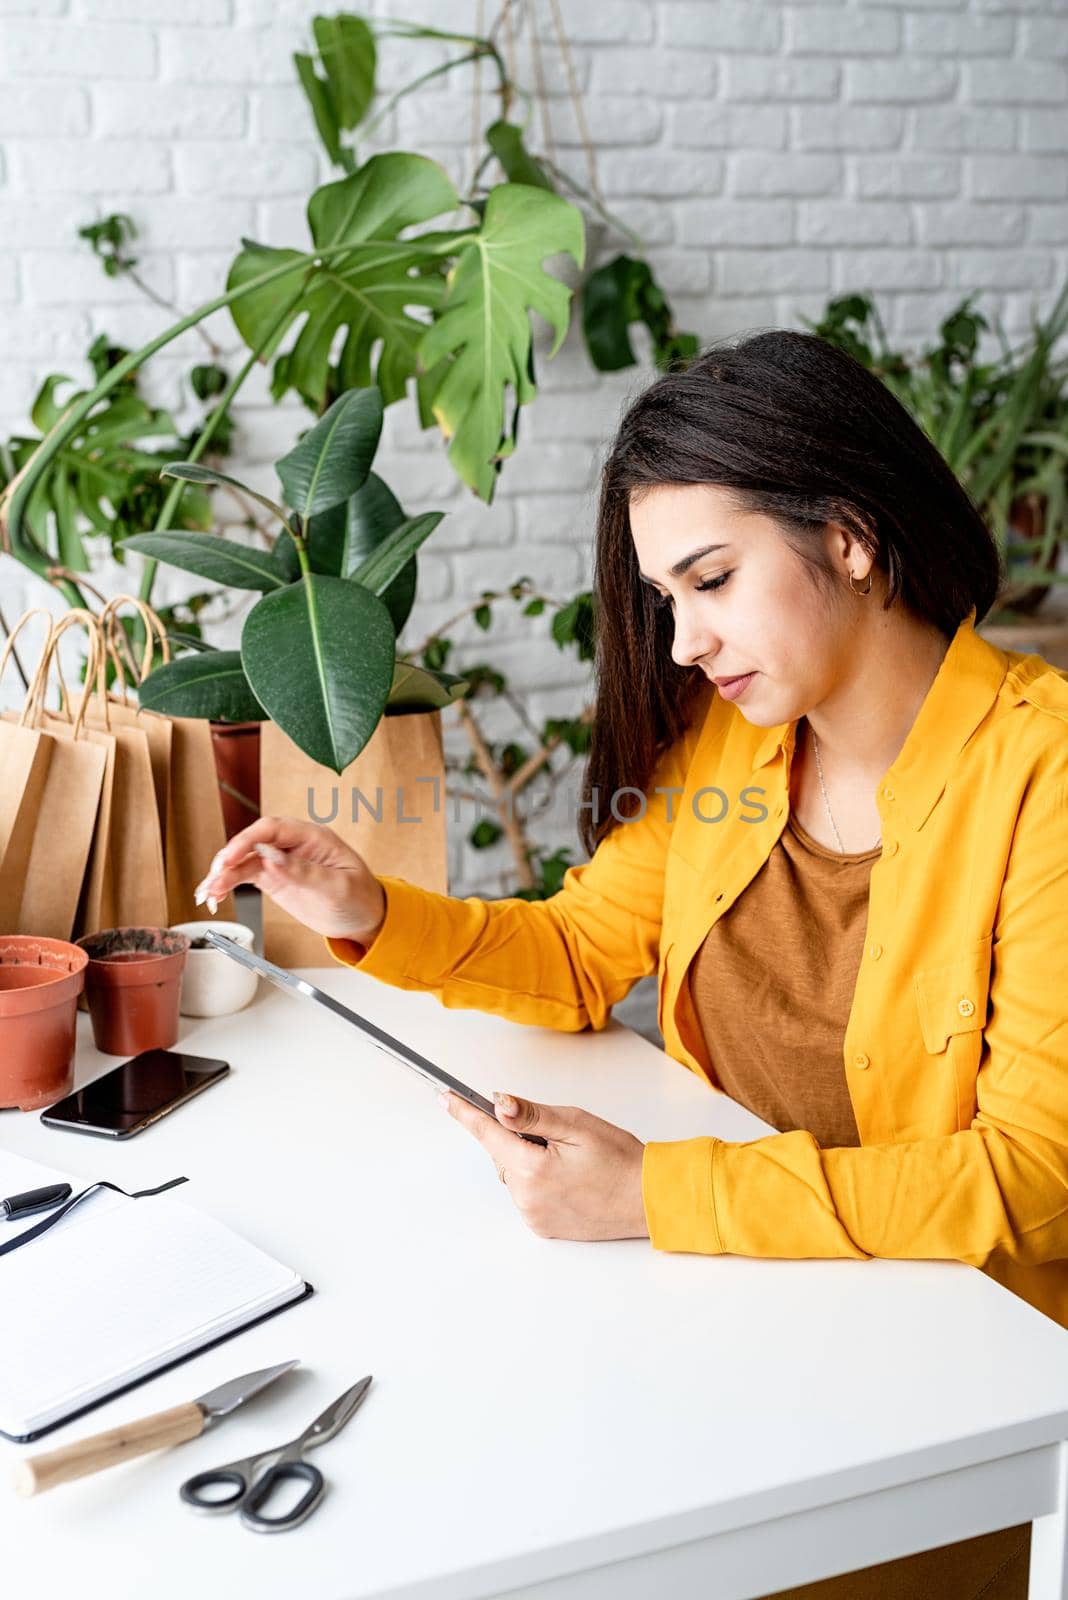 Home gardening. Small business. Woman gardener working on digital tablet surrounded with plants